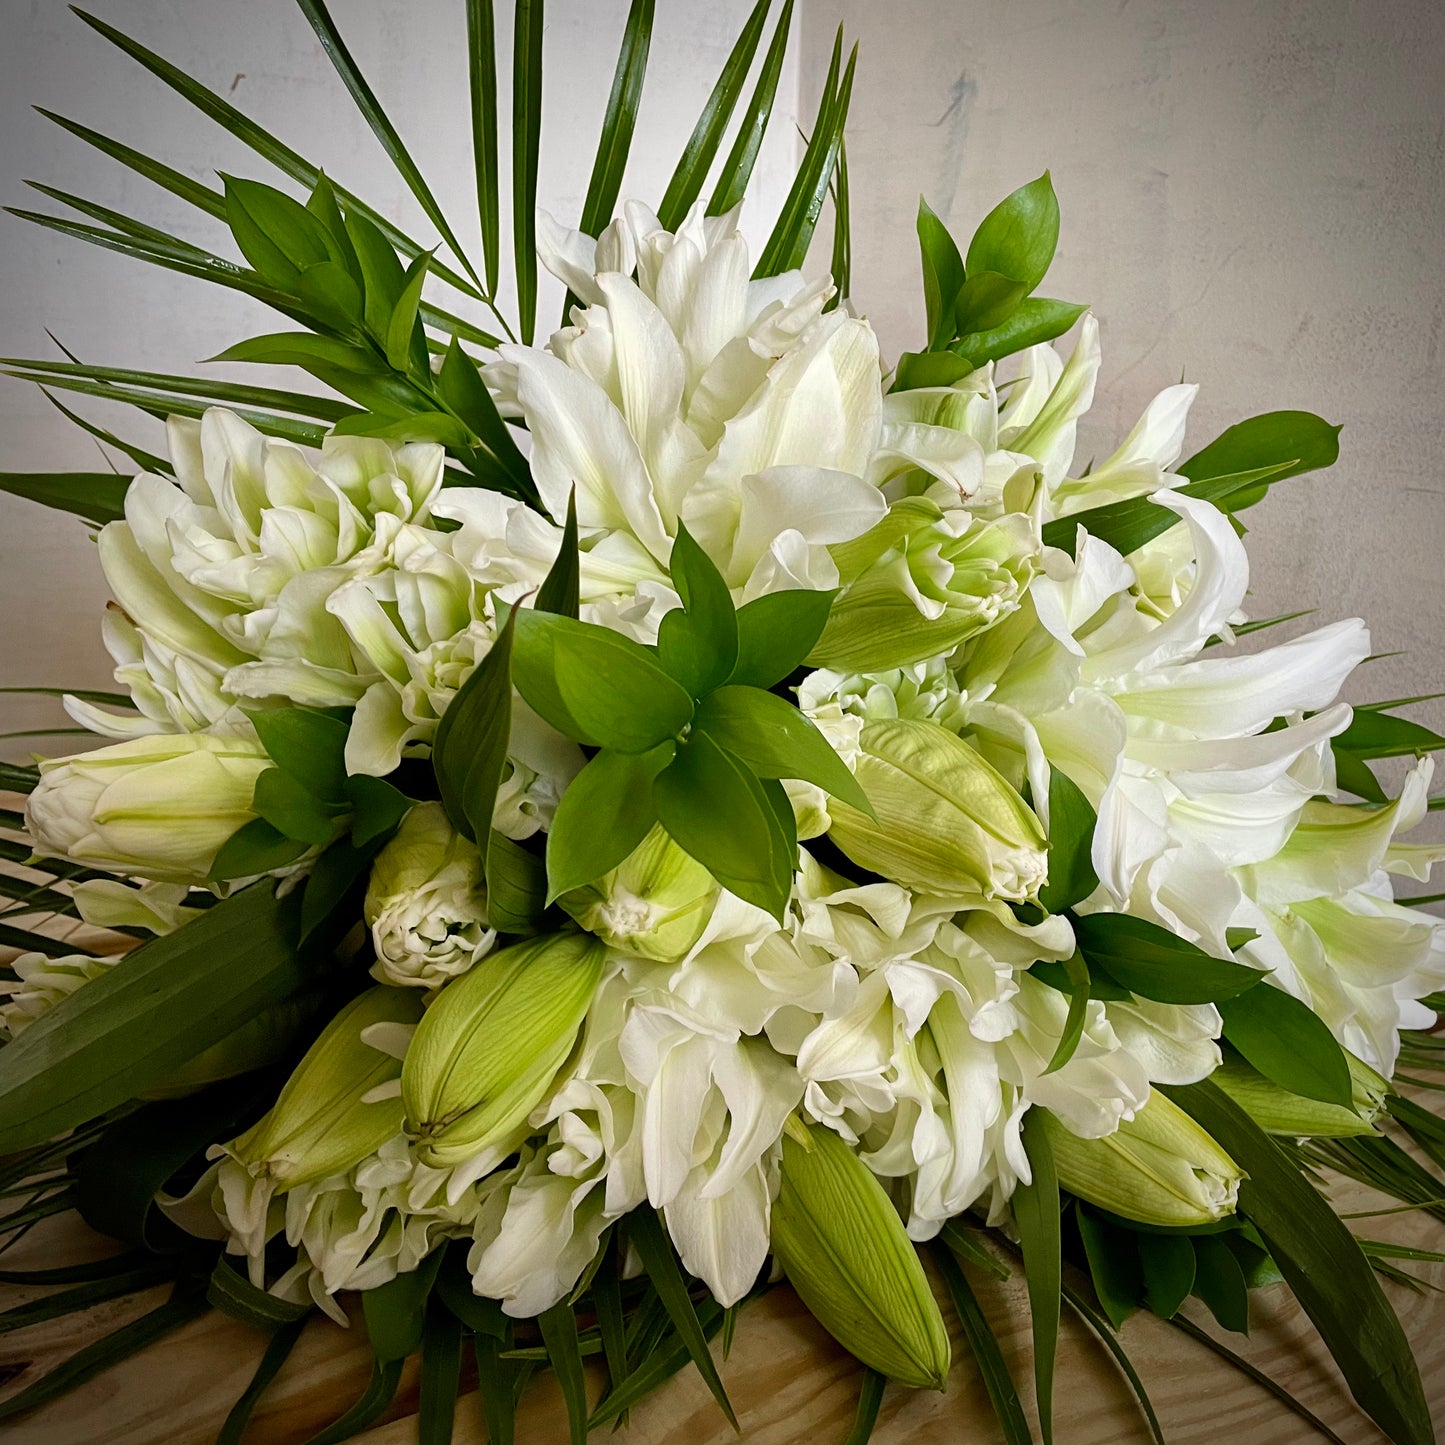 "Make My Day" white flowers displayed on a wooden table